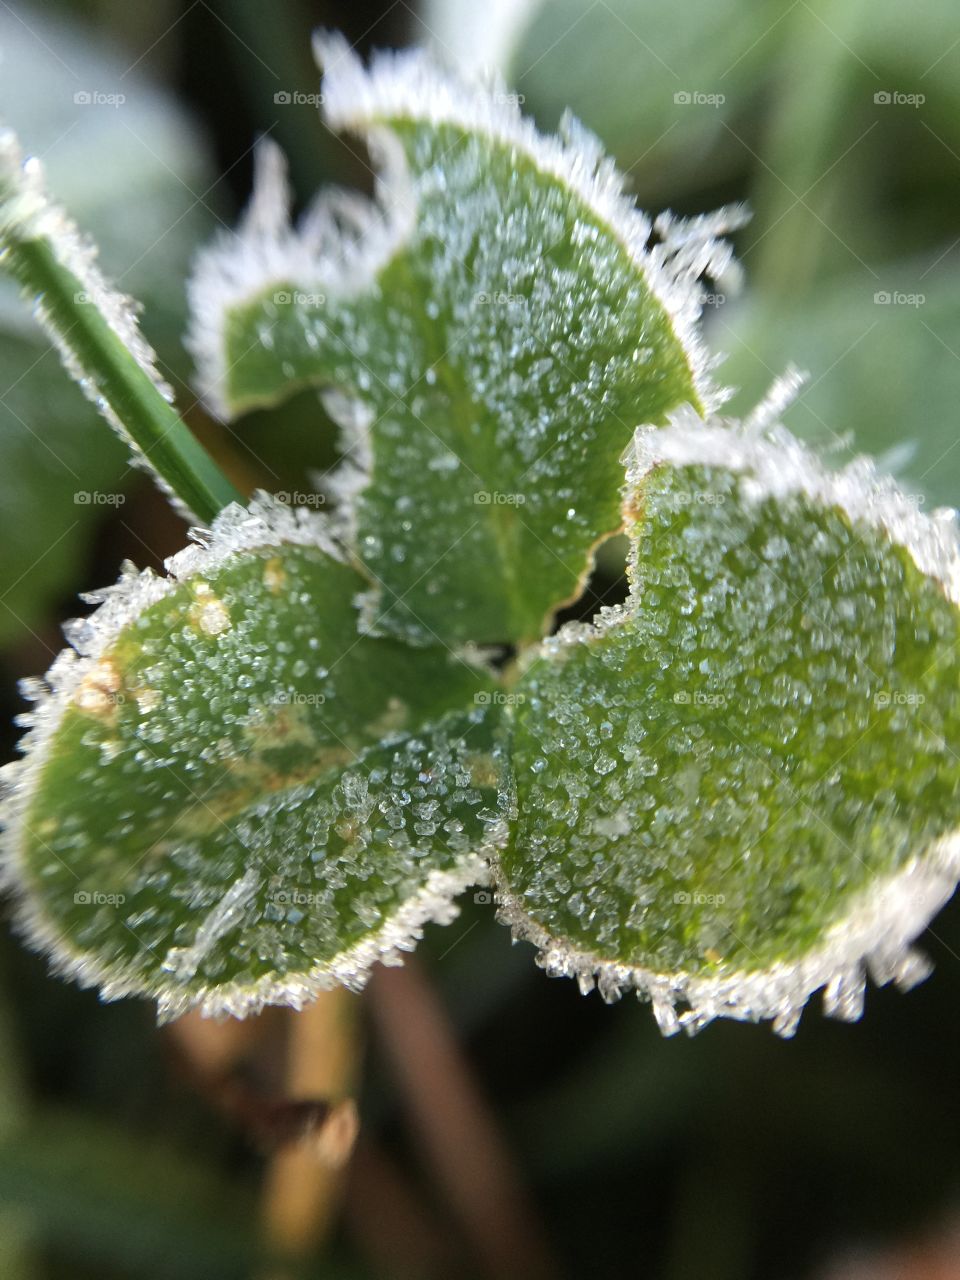 Frost on a clover